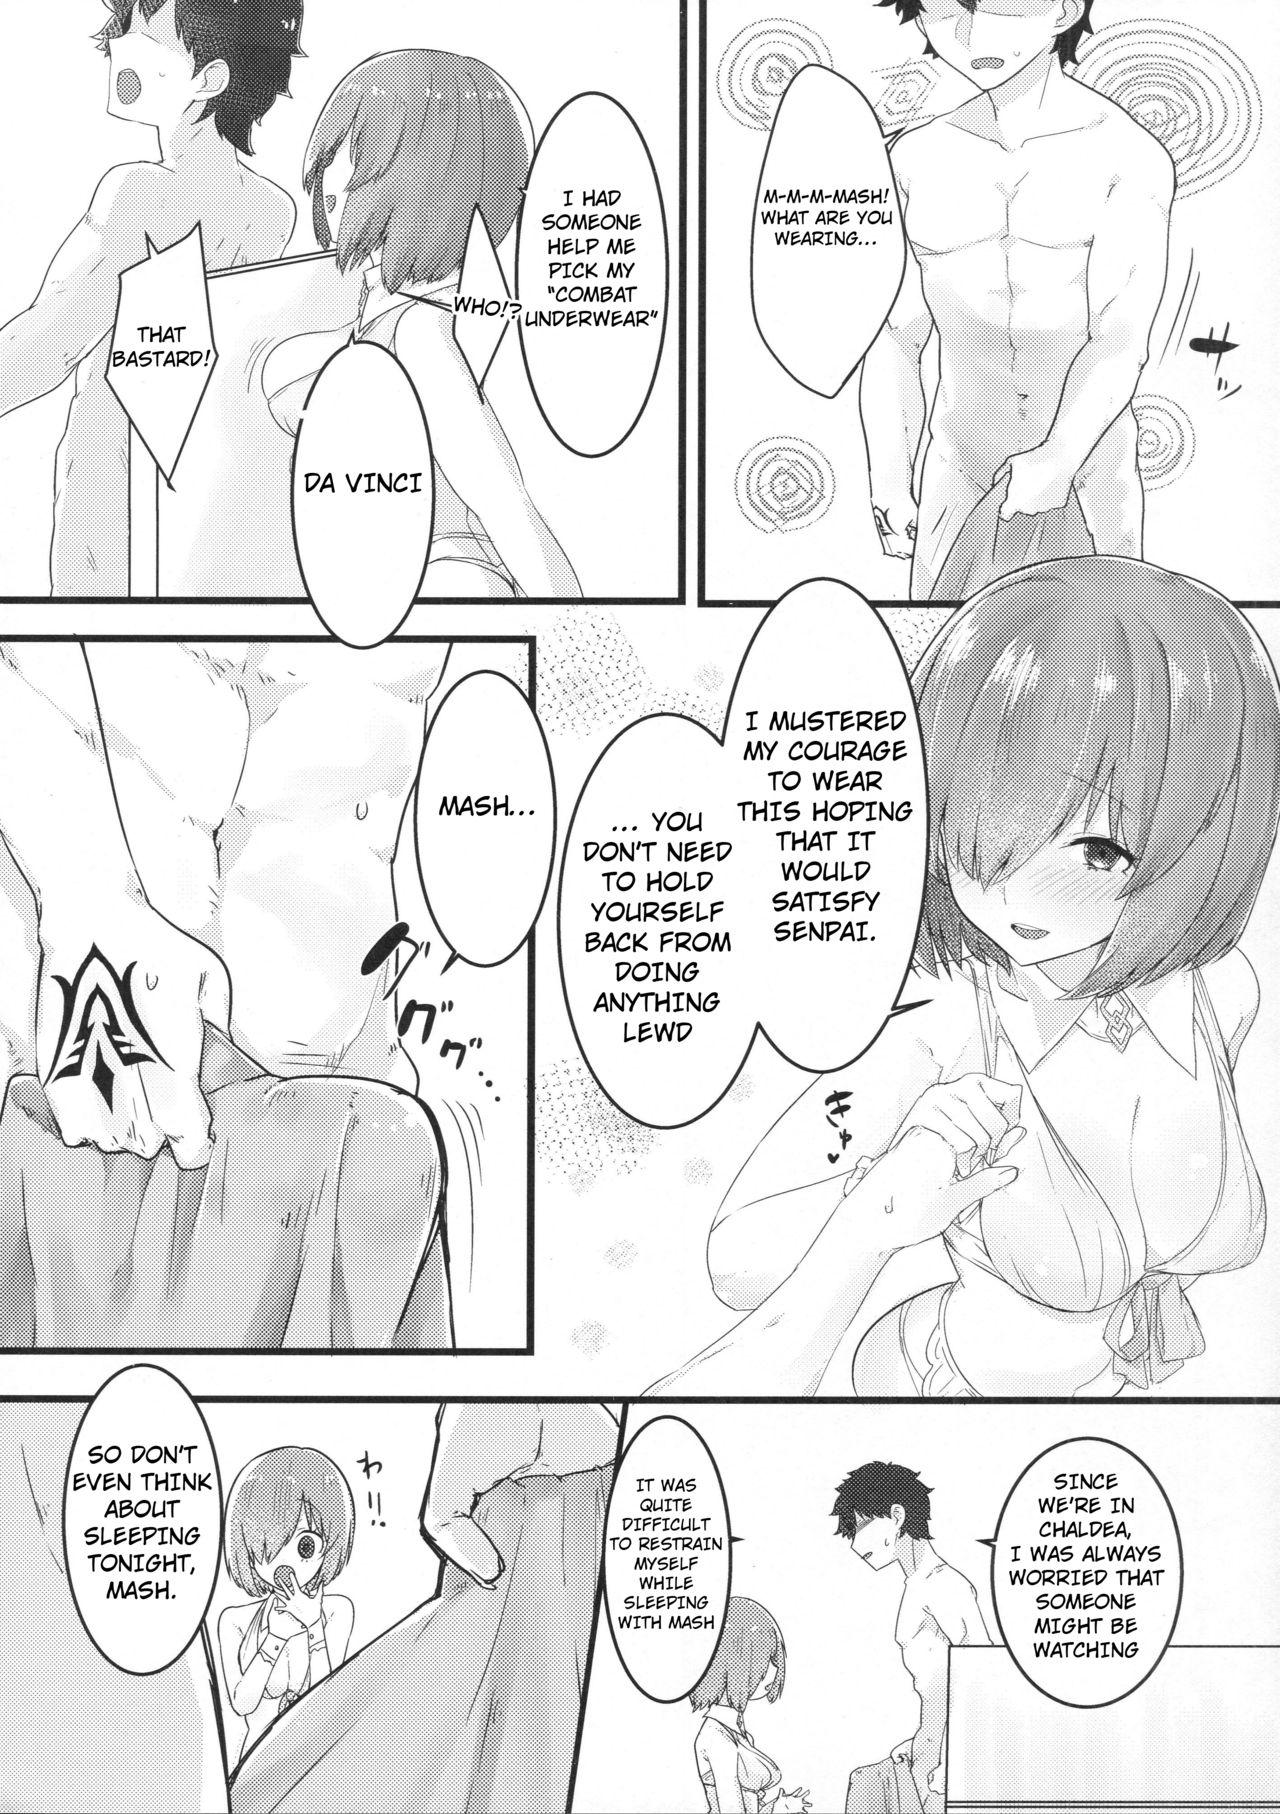 High Heels Ecchi Shi Mash - Fate grand order Exposed - Page 9